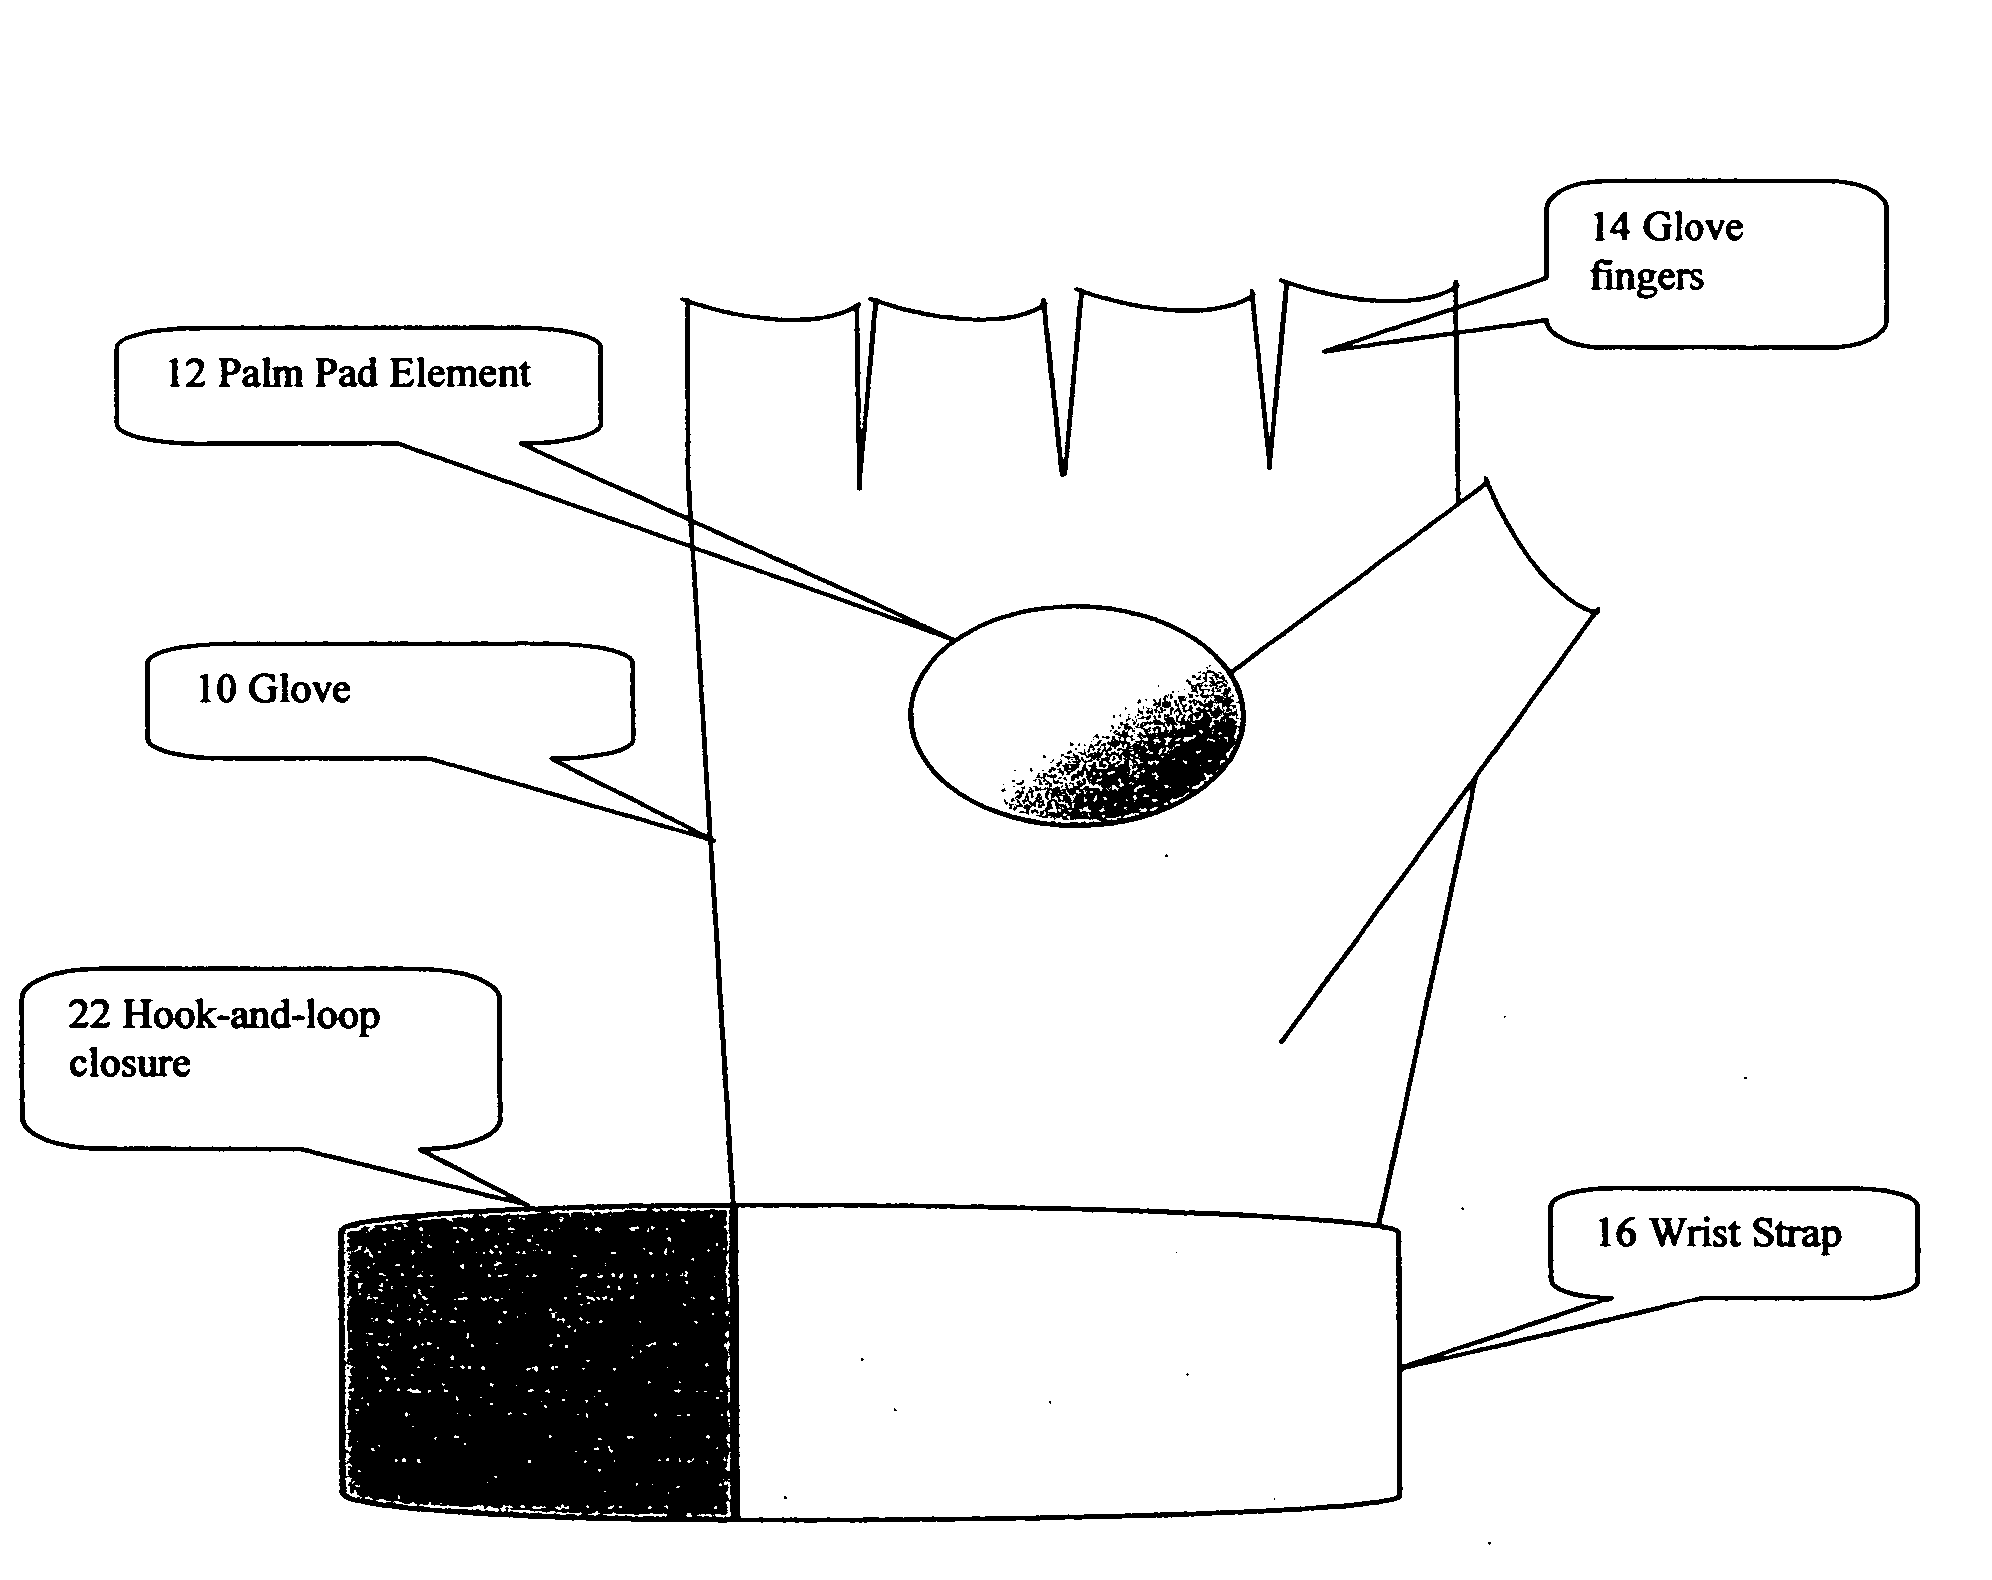 Article of manufacture, more specifically, a basketball training glove